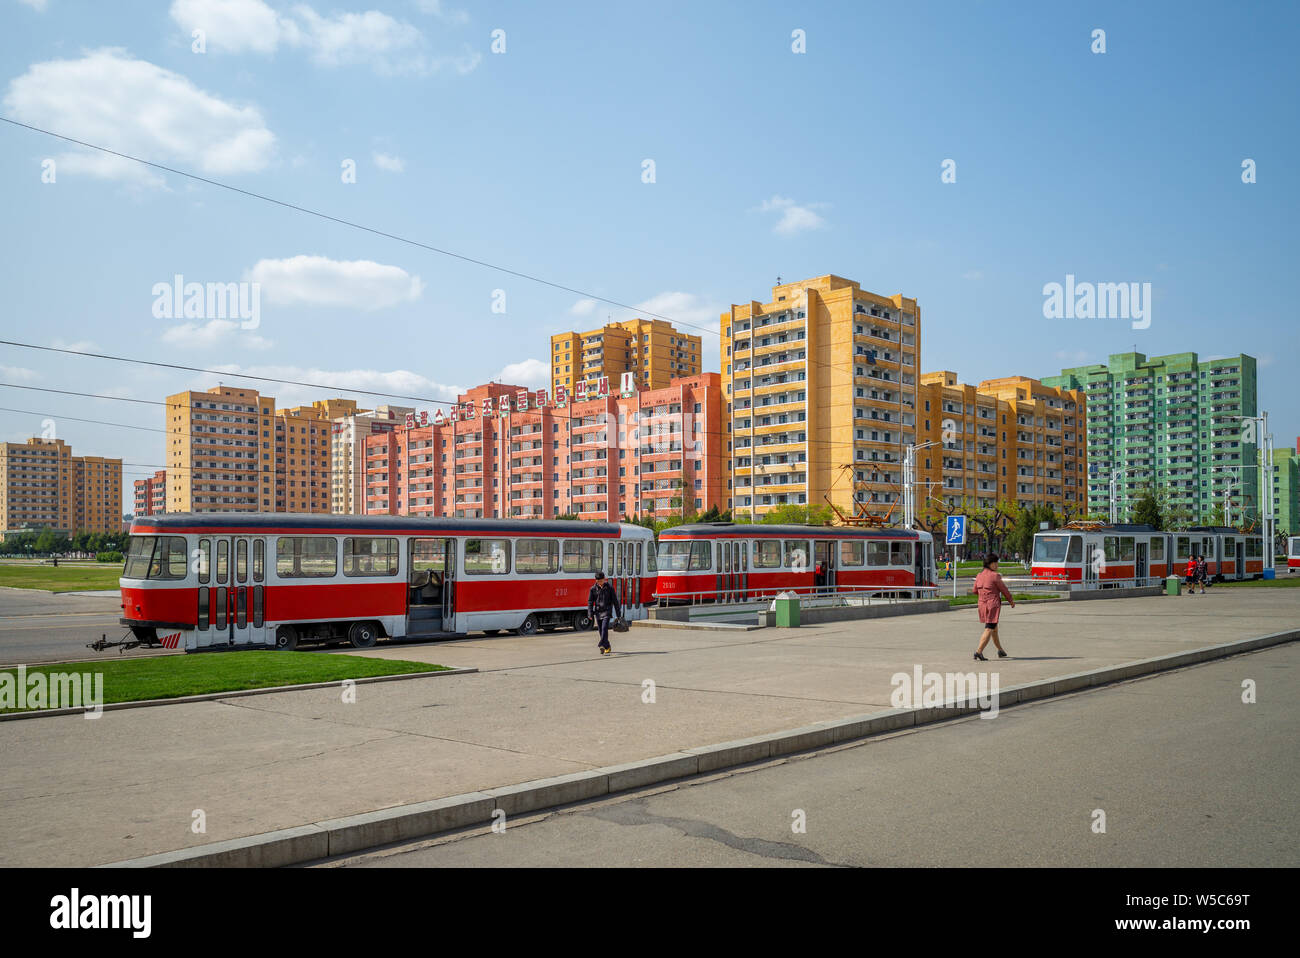 Pyongyang, North Korea - April 29, 2019: street view of pyongyang, the capital and largest city of the Democratic People's Republic of Korea (DPRK) Stock Photo